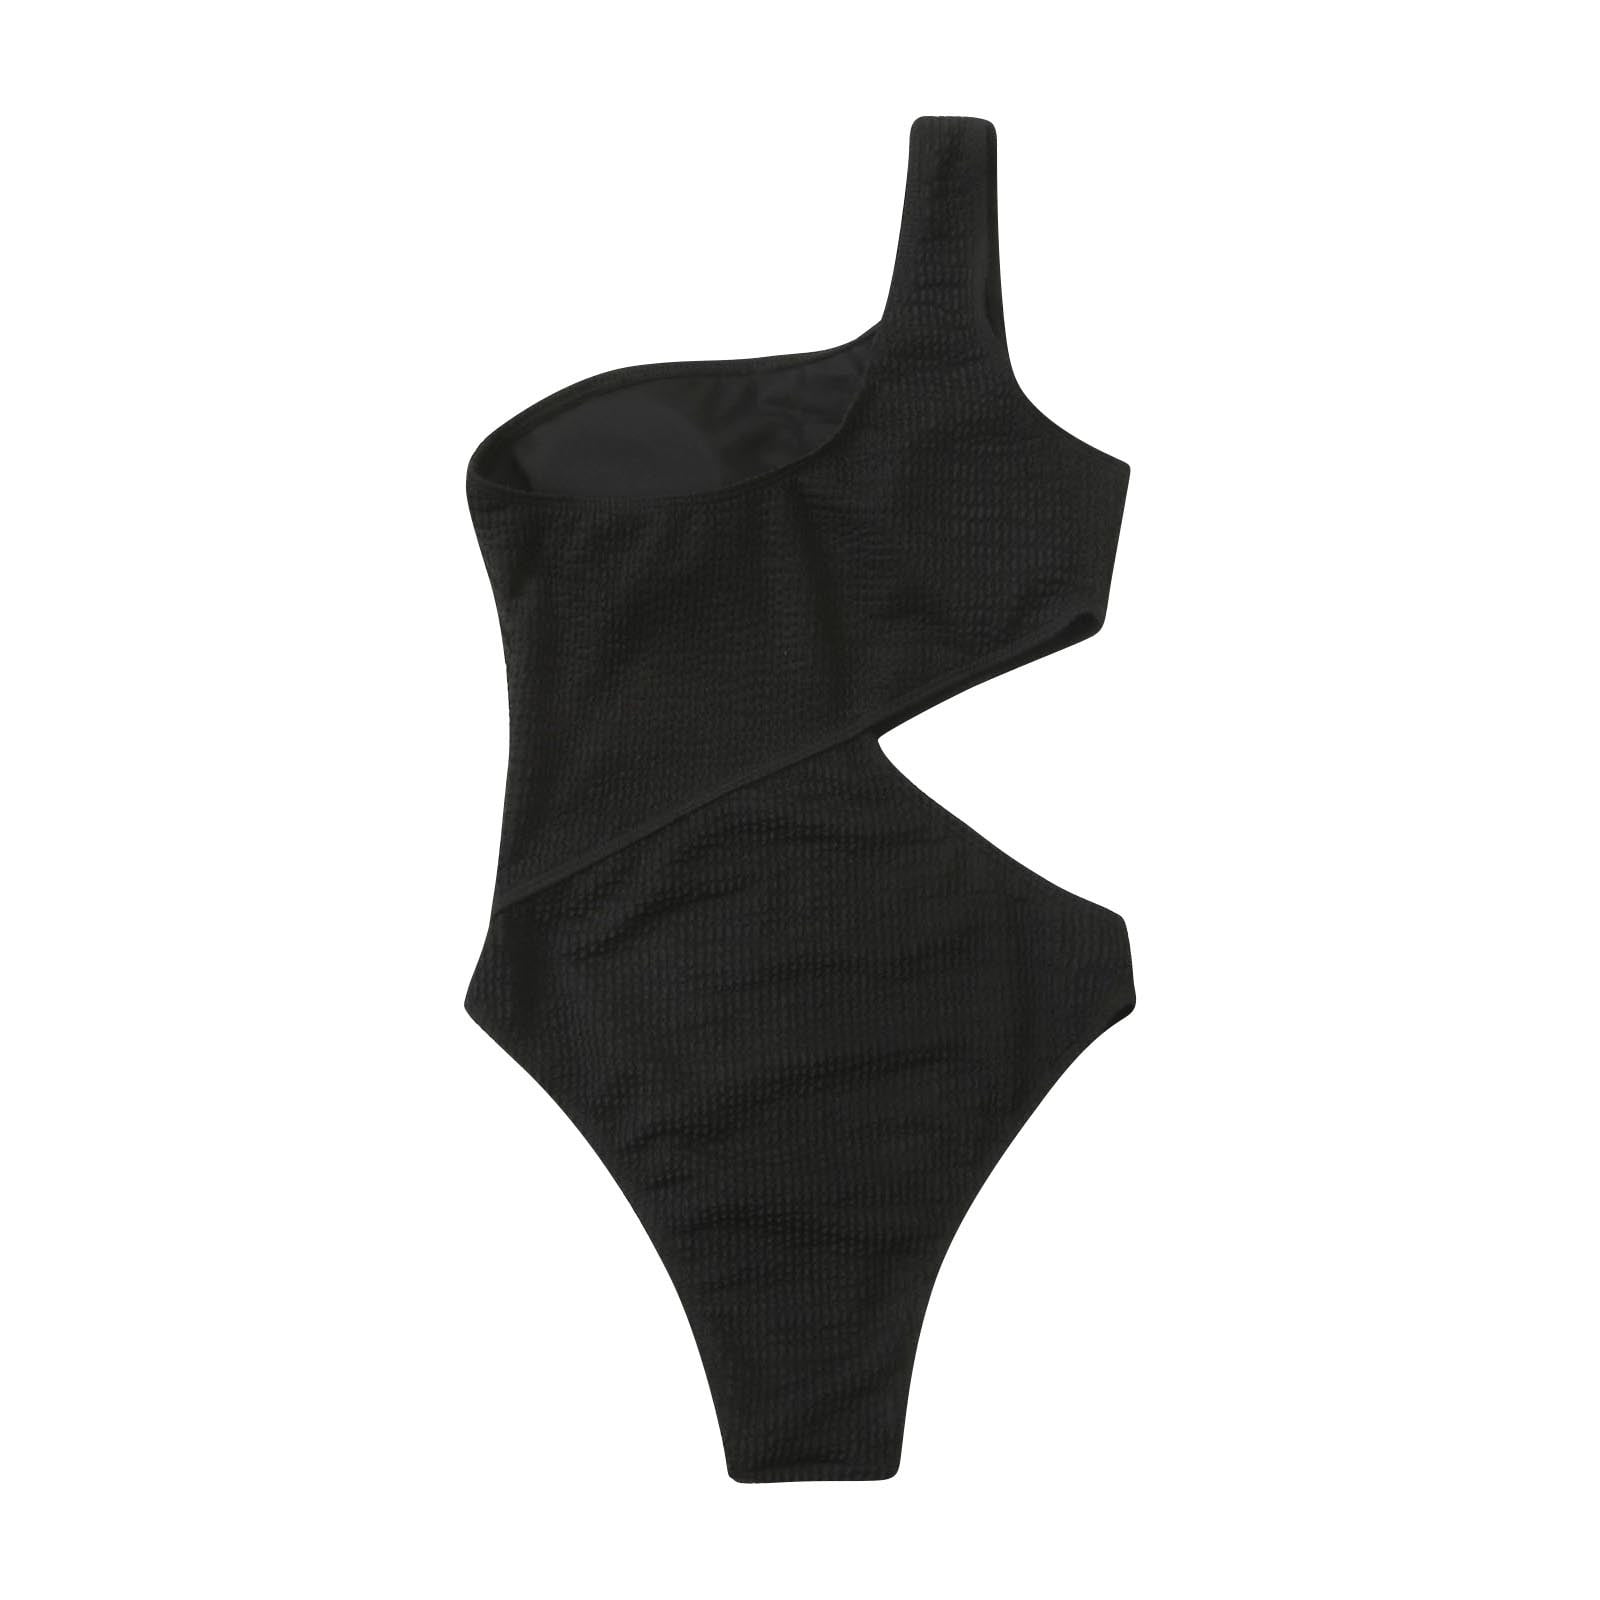 VKEKIEO One-Piece Swimsuit One Shoulder Bra Style Support Army